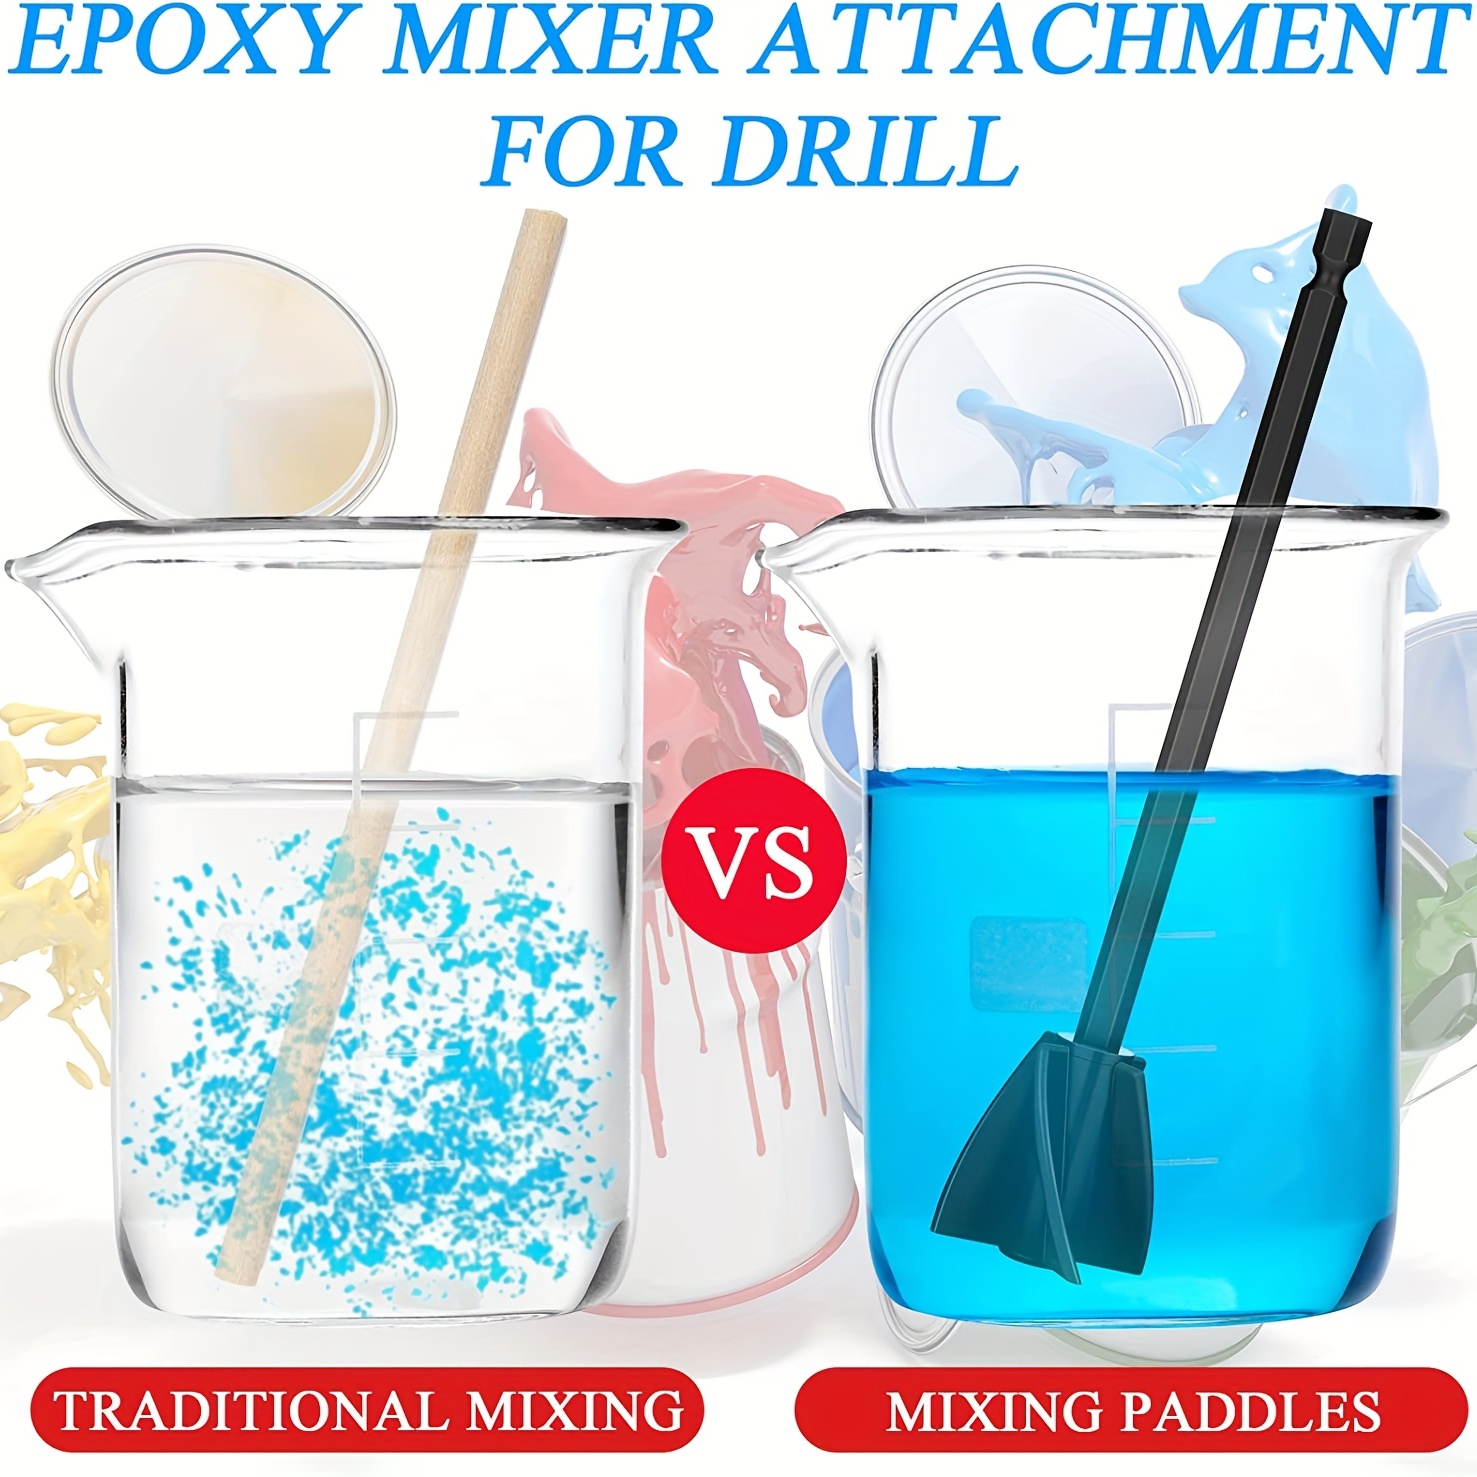 Epoxy Mixer for Resin Handheld Attachment Resin Mixer for Mixing Epoxy Mixer